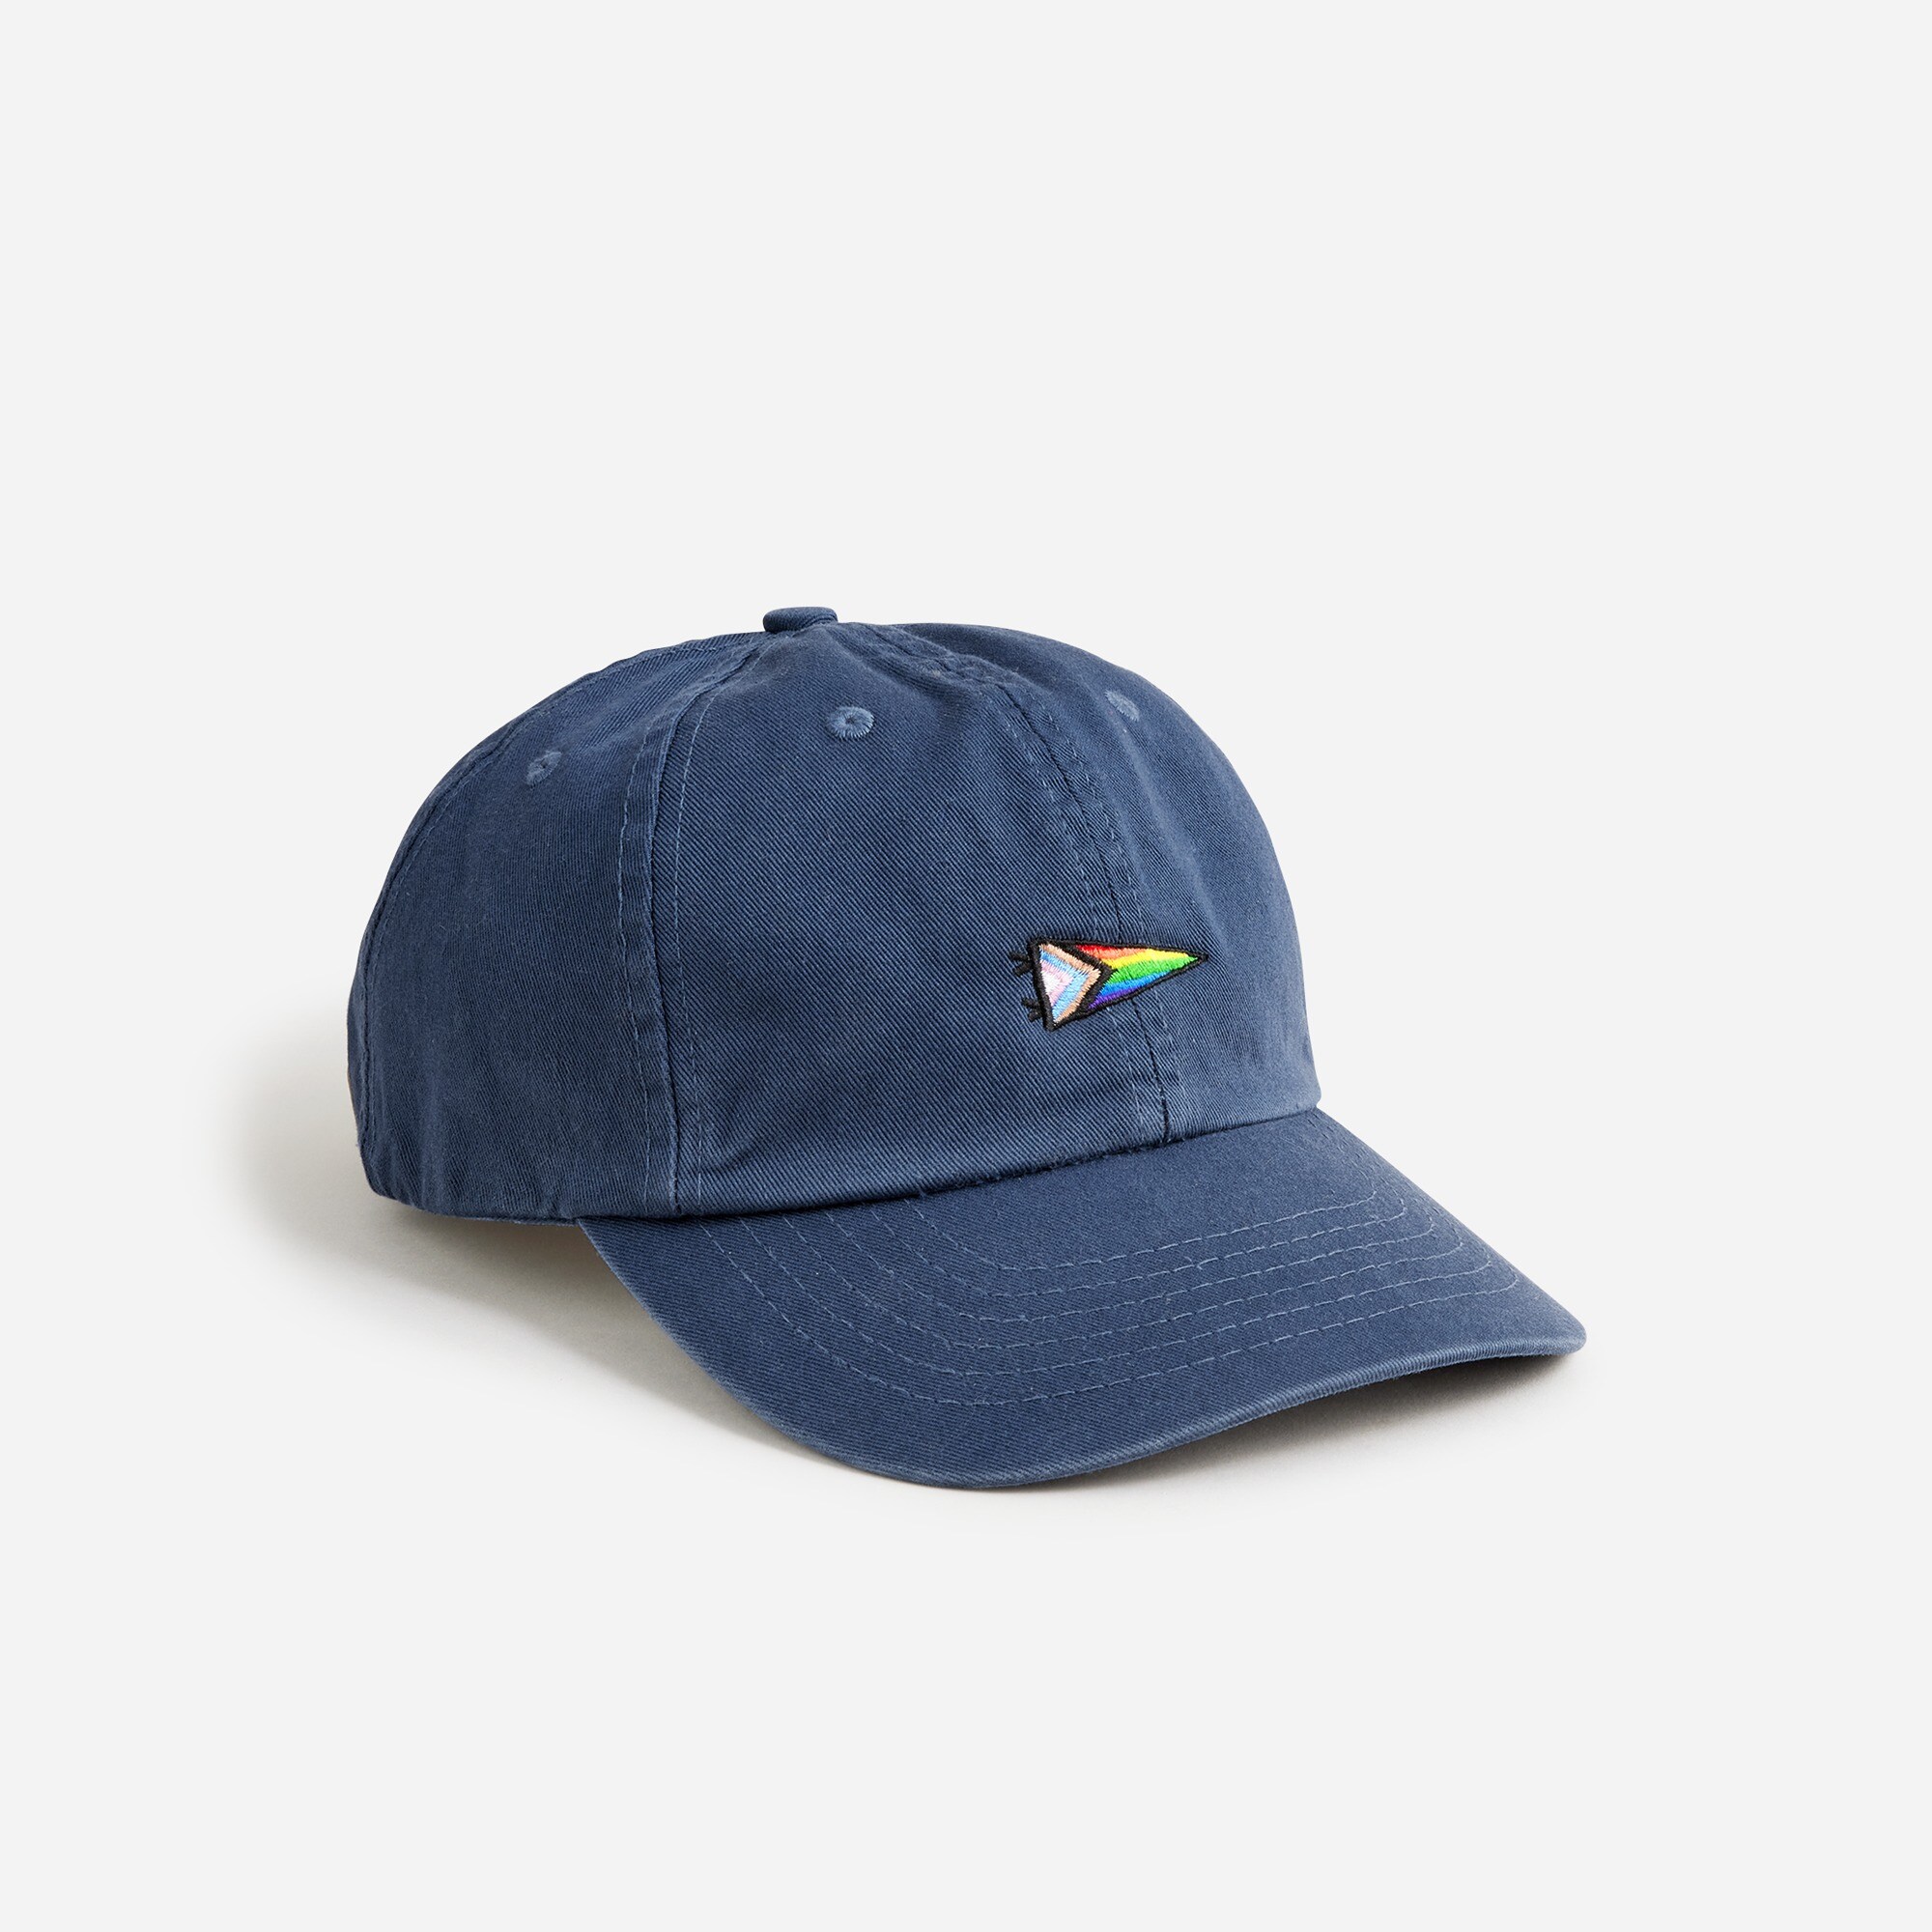 mens Made-in-the-USA garment-dyed twill Pride baseball cap